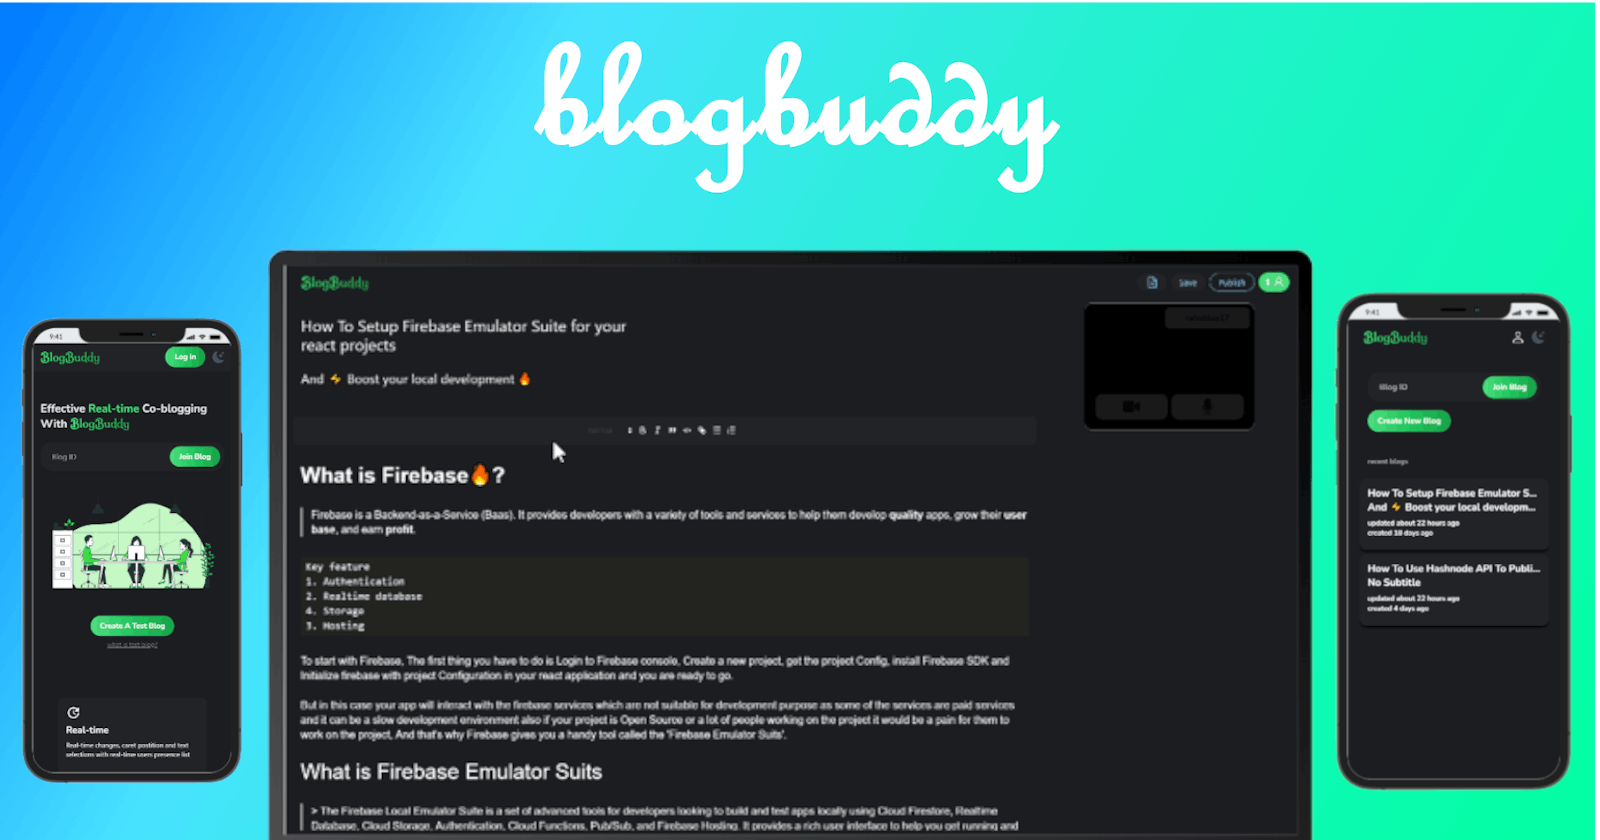 Introducing BlogBuddy : an effective Co-Blogging tool